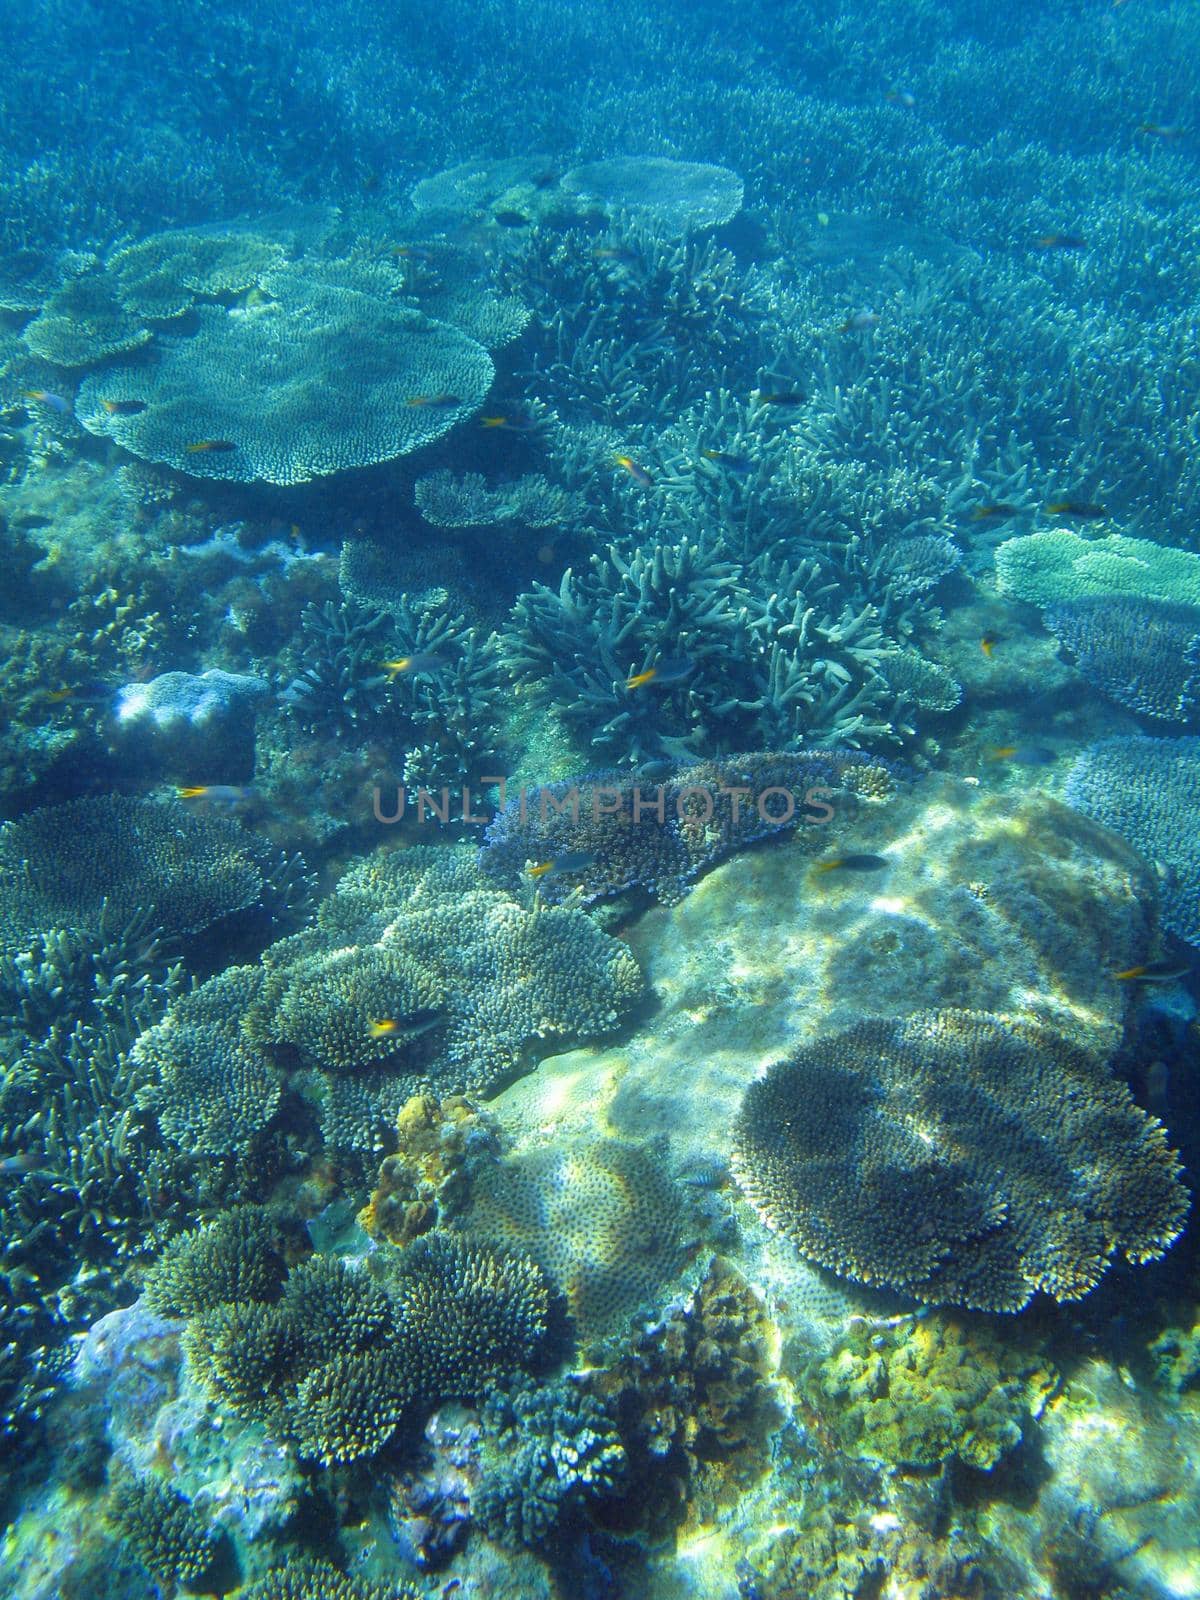 A colourful assortment of Plate Corals forming a coral reef